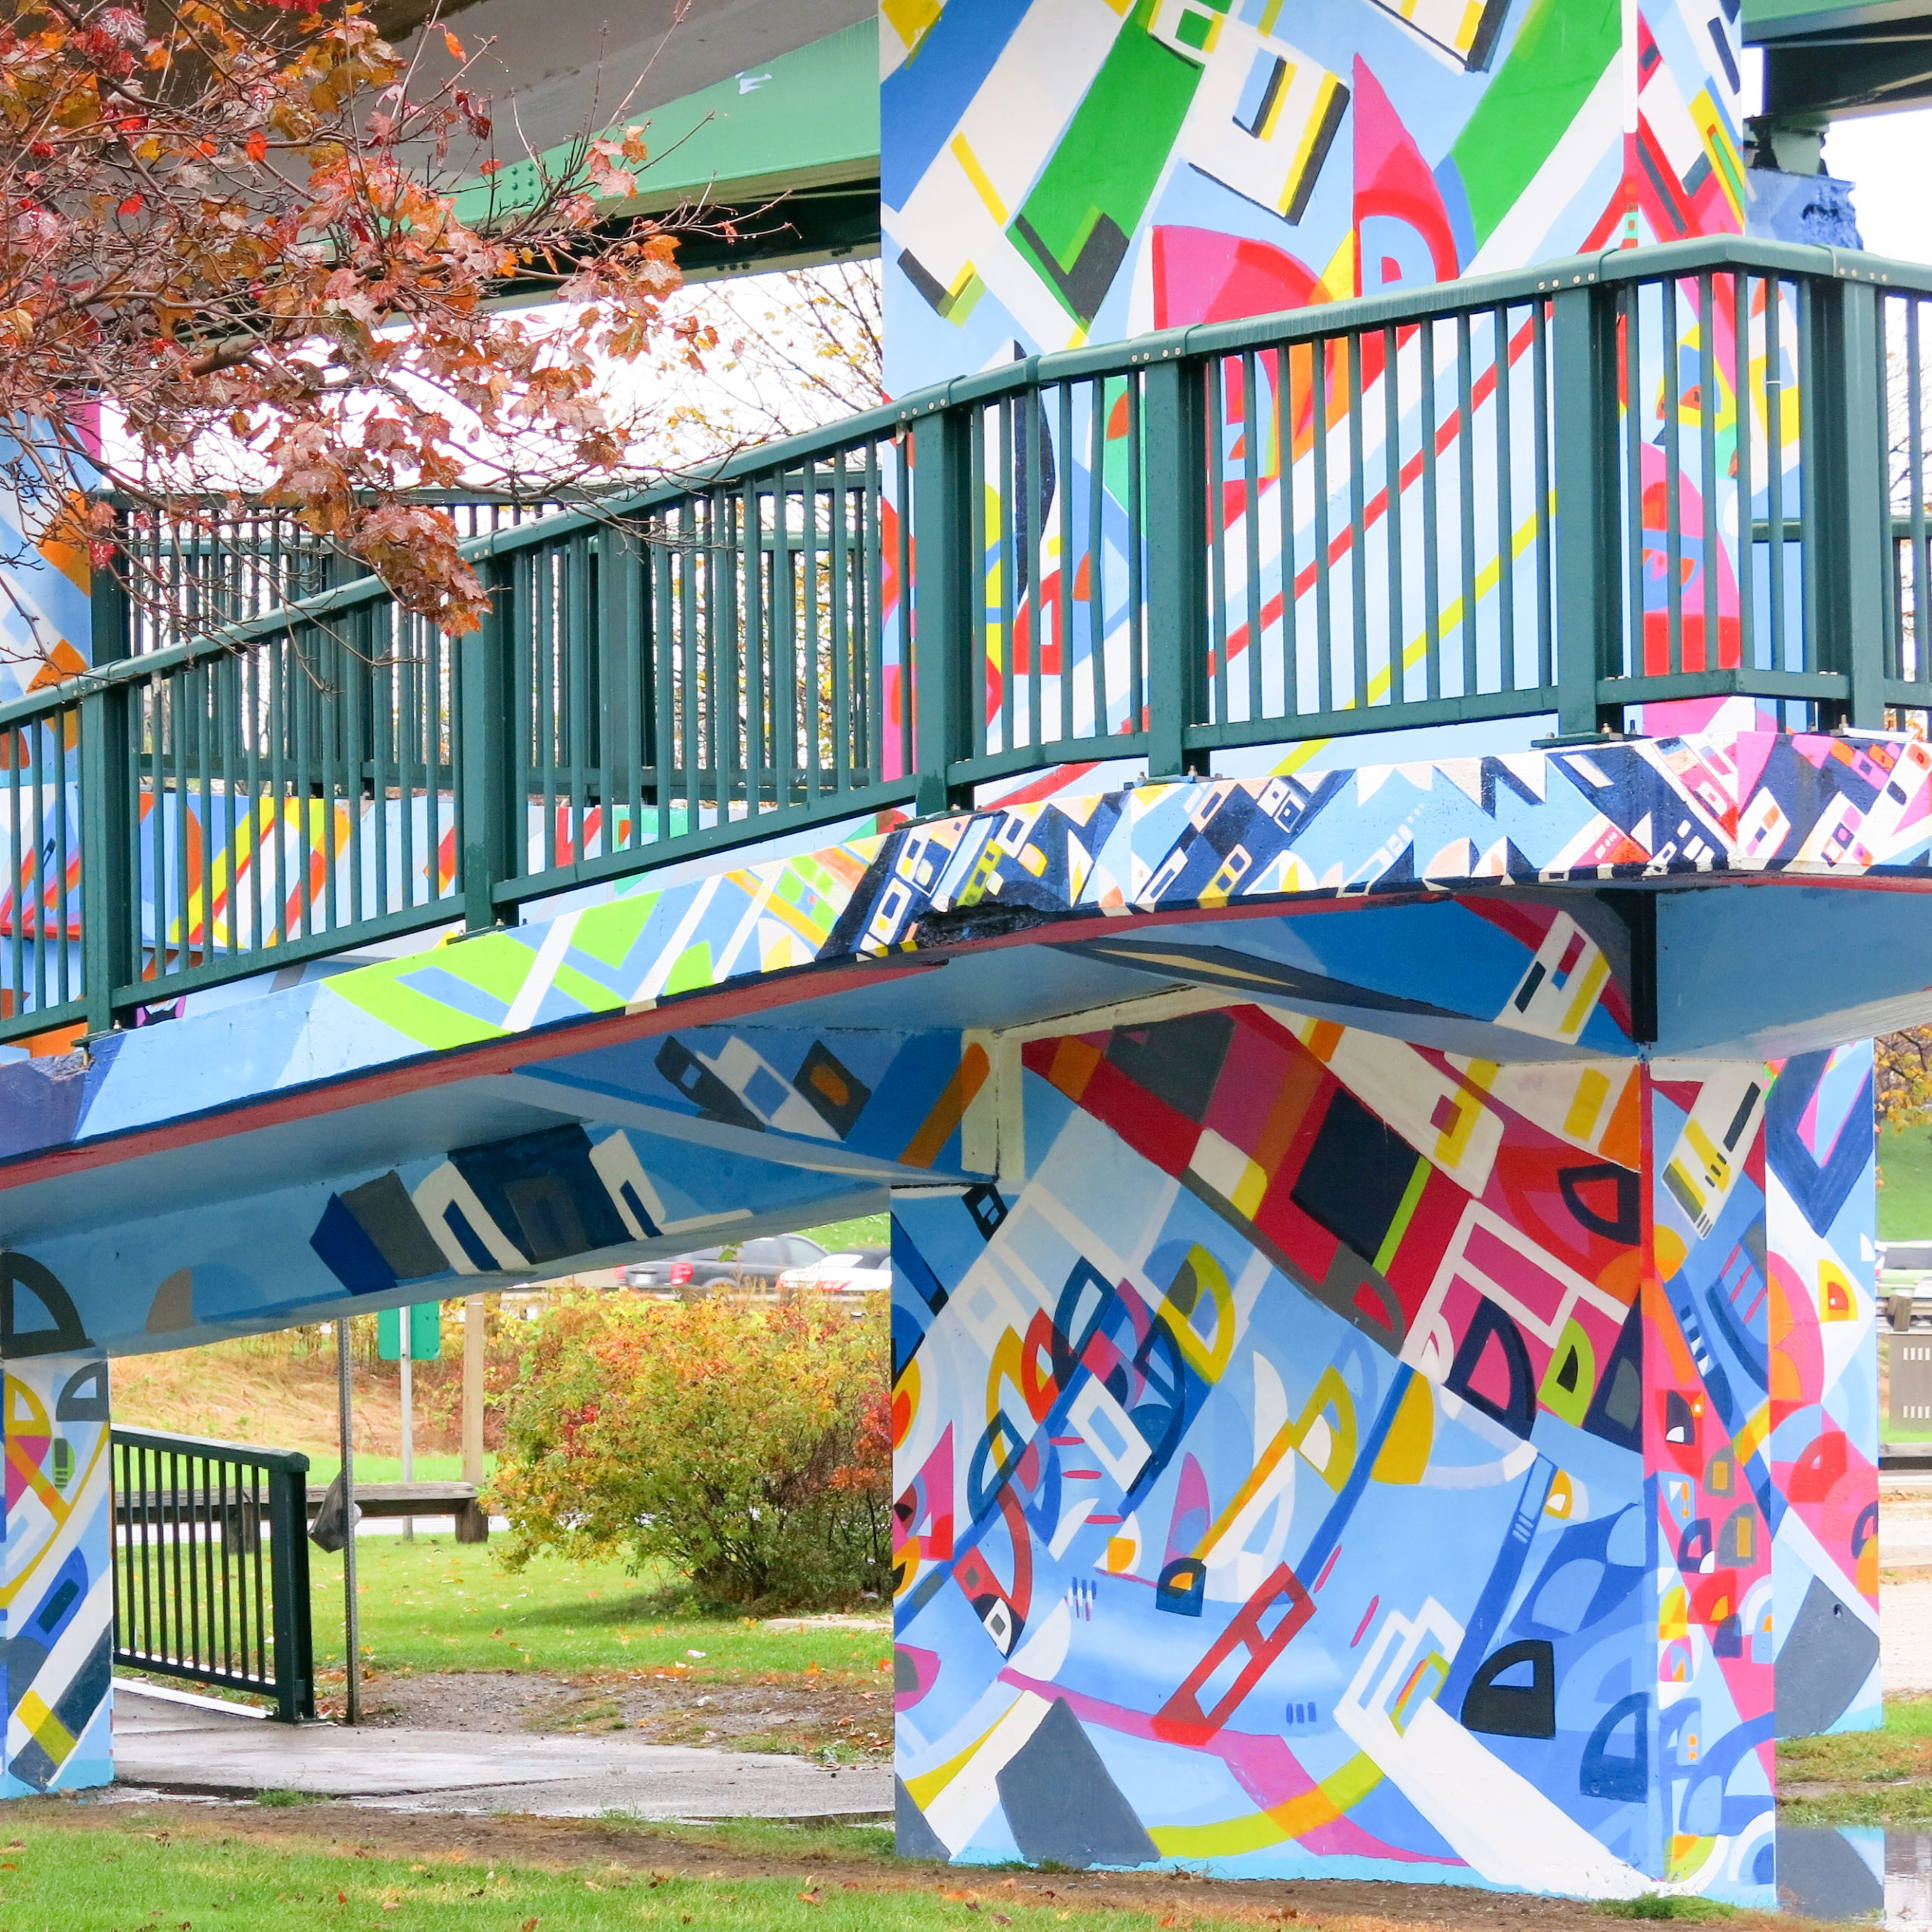 Photo of Sister Cities Mural by Justus Roe, with colours of blue, pink, green in a park